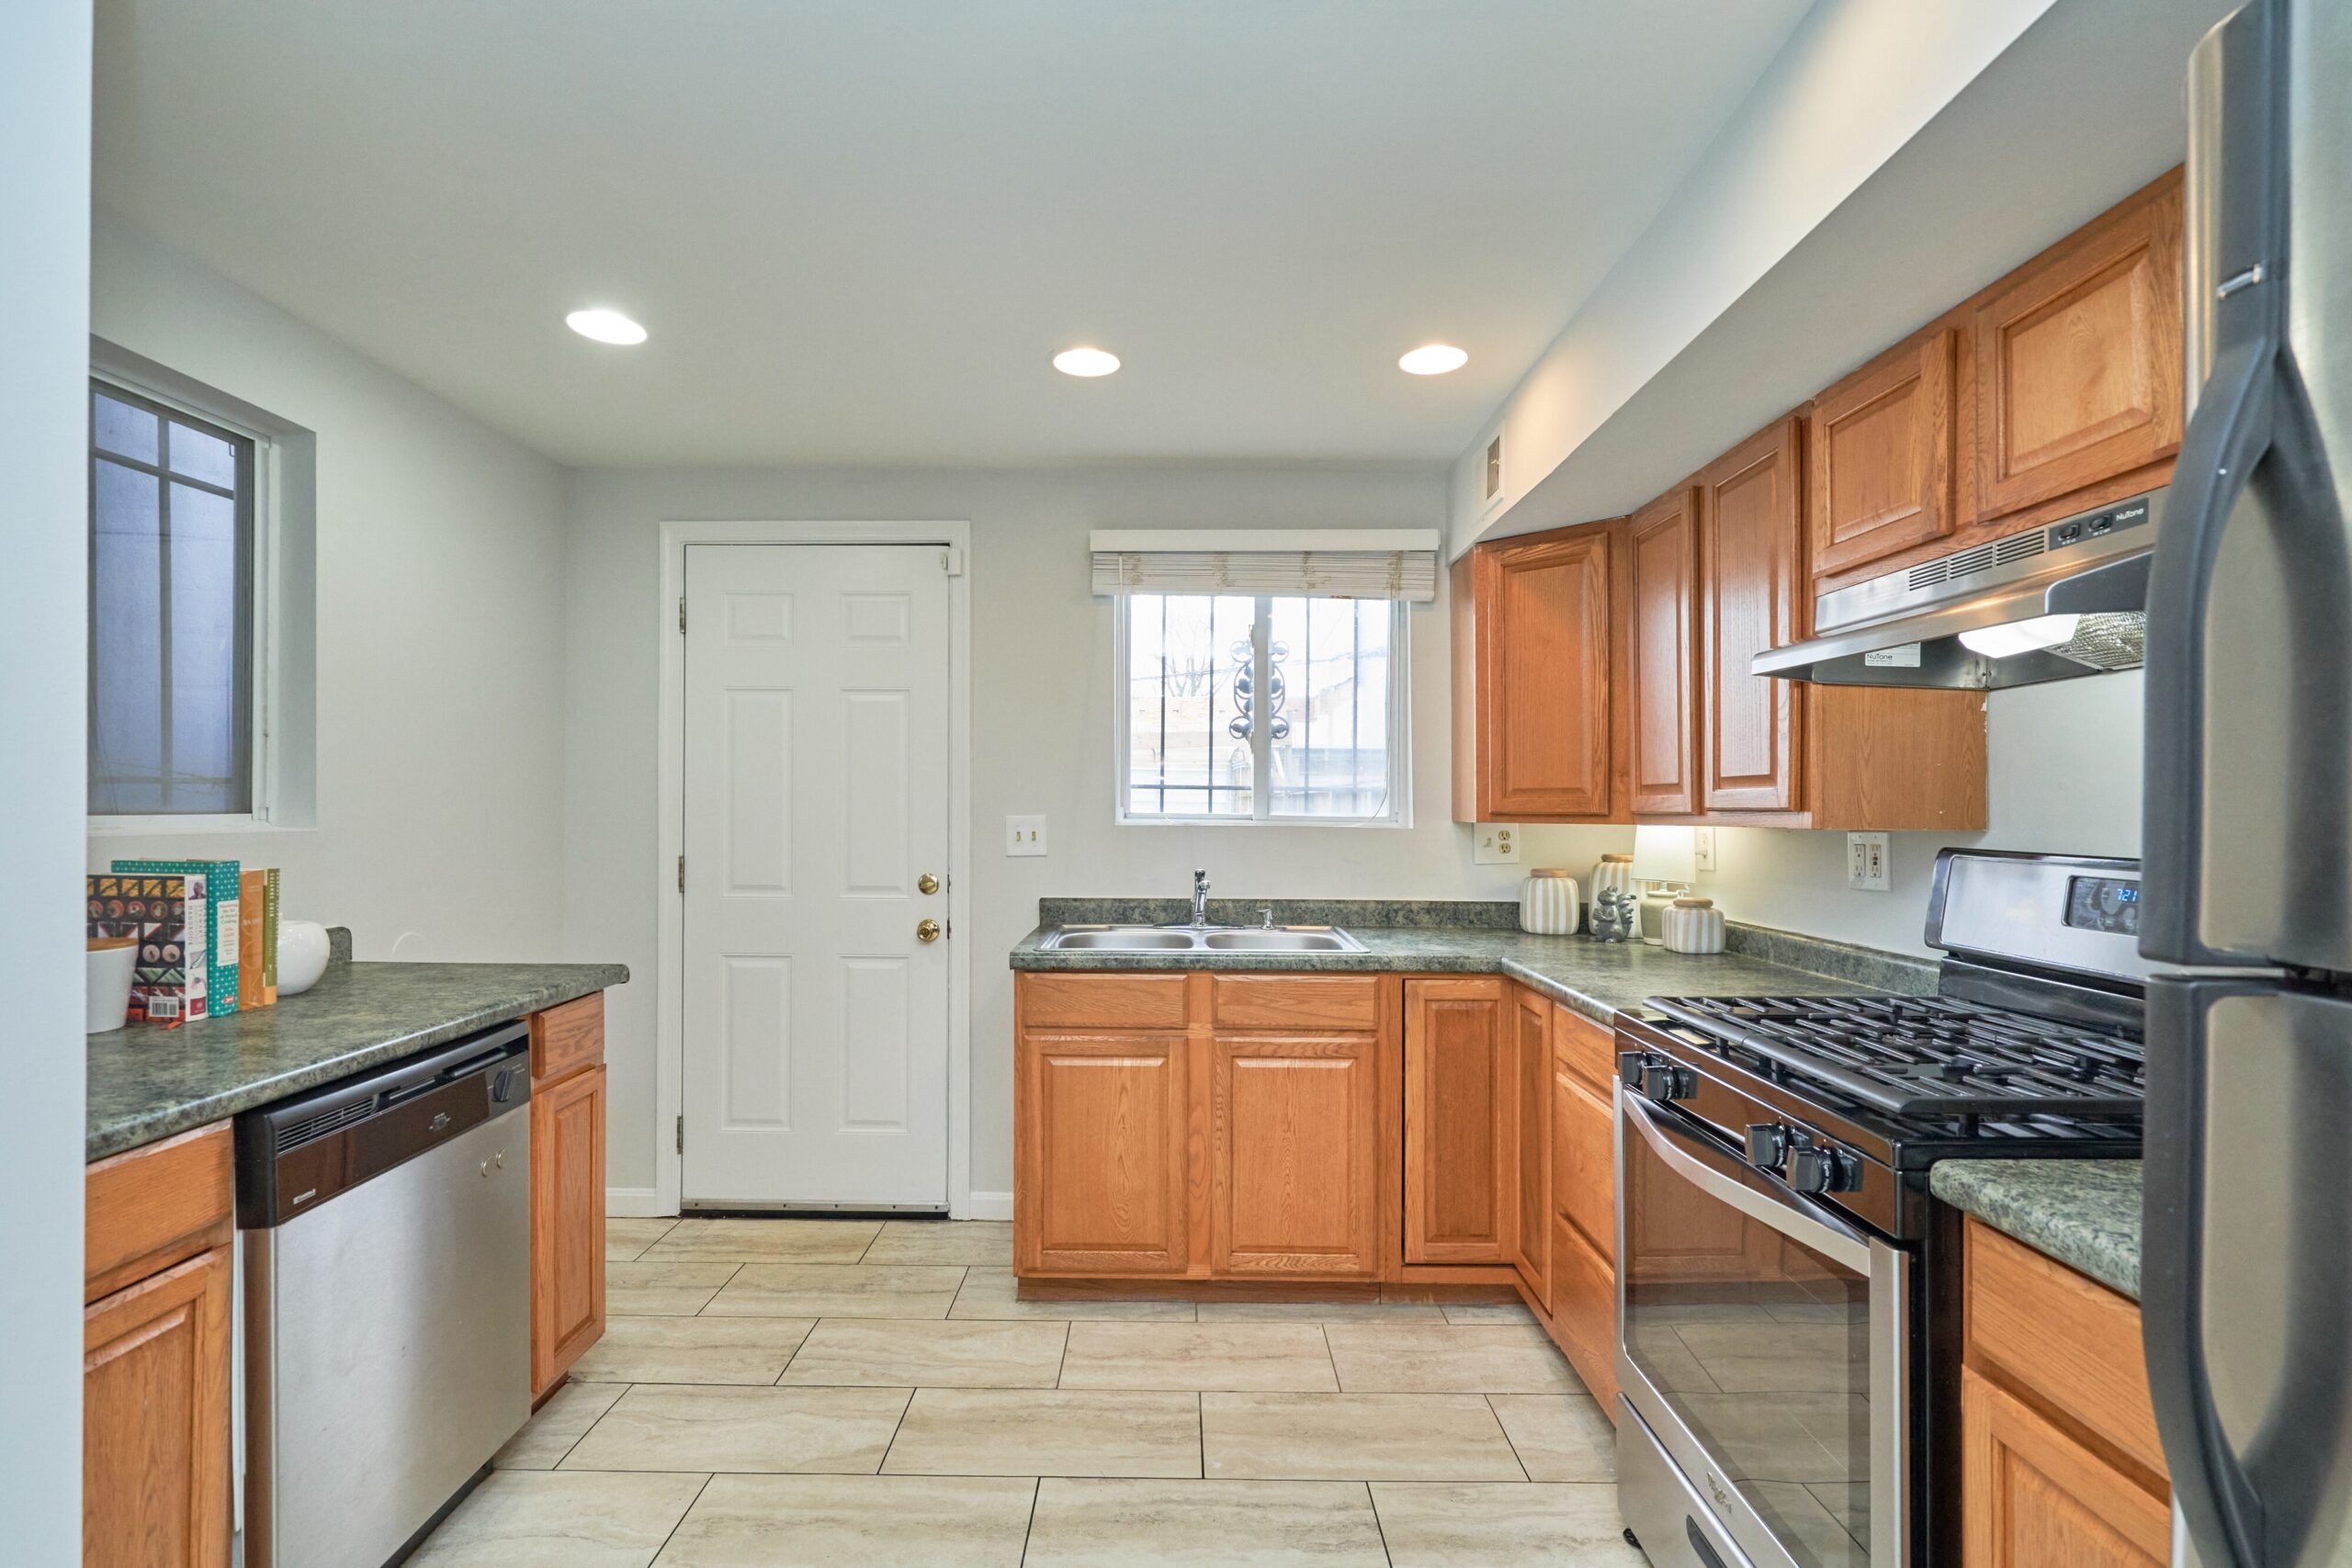 Professional interior photo of 1313 K Street SE, Washington, DC - showing the kitchen with walnut cabinets and stainless appliances and back door leading to the patio.